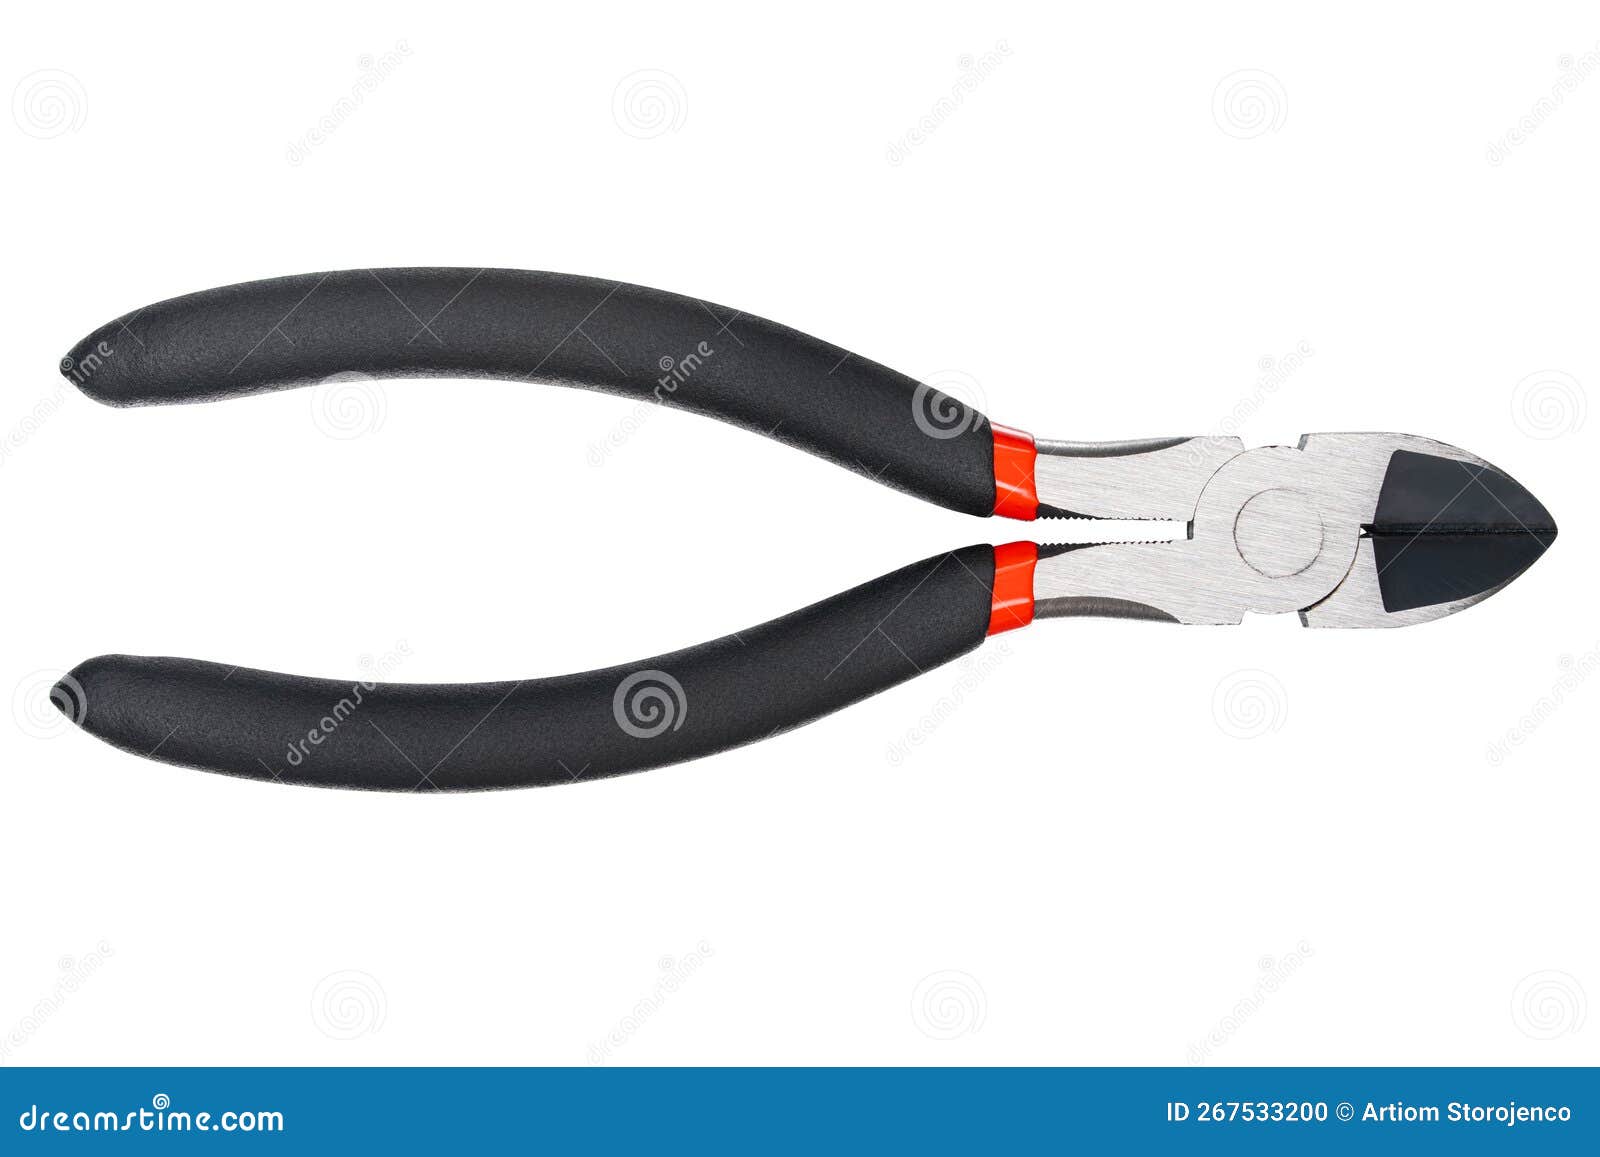 Diagonal Cutting Pliers Side Cutter Nippers Repair Tool Wire Cutter Red